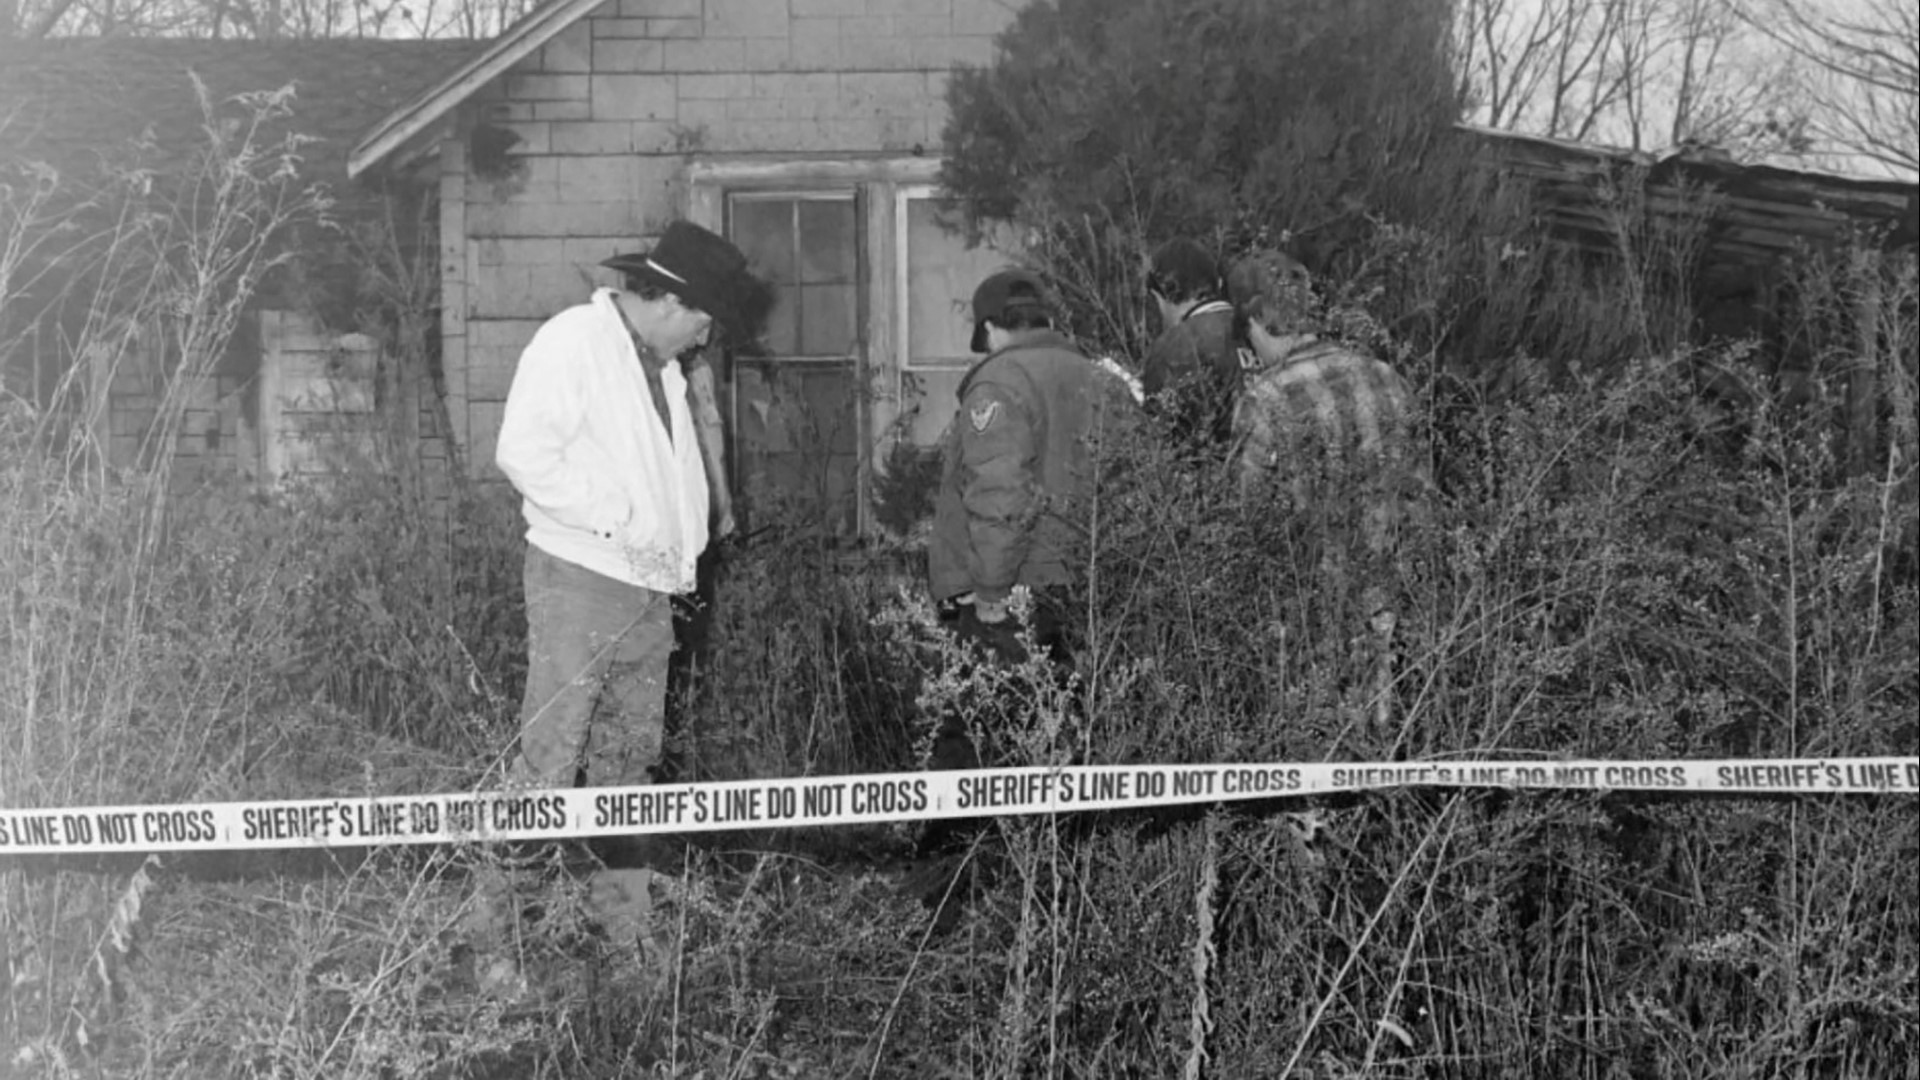 After Detectives Lorie Howard and Rhonda Wise spent decades gathering evidence, they announced Garber’s killer as Talfey Reeves.